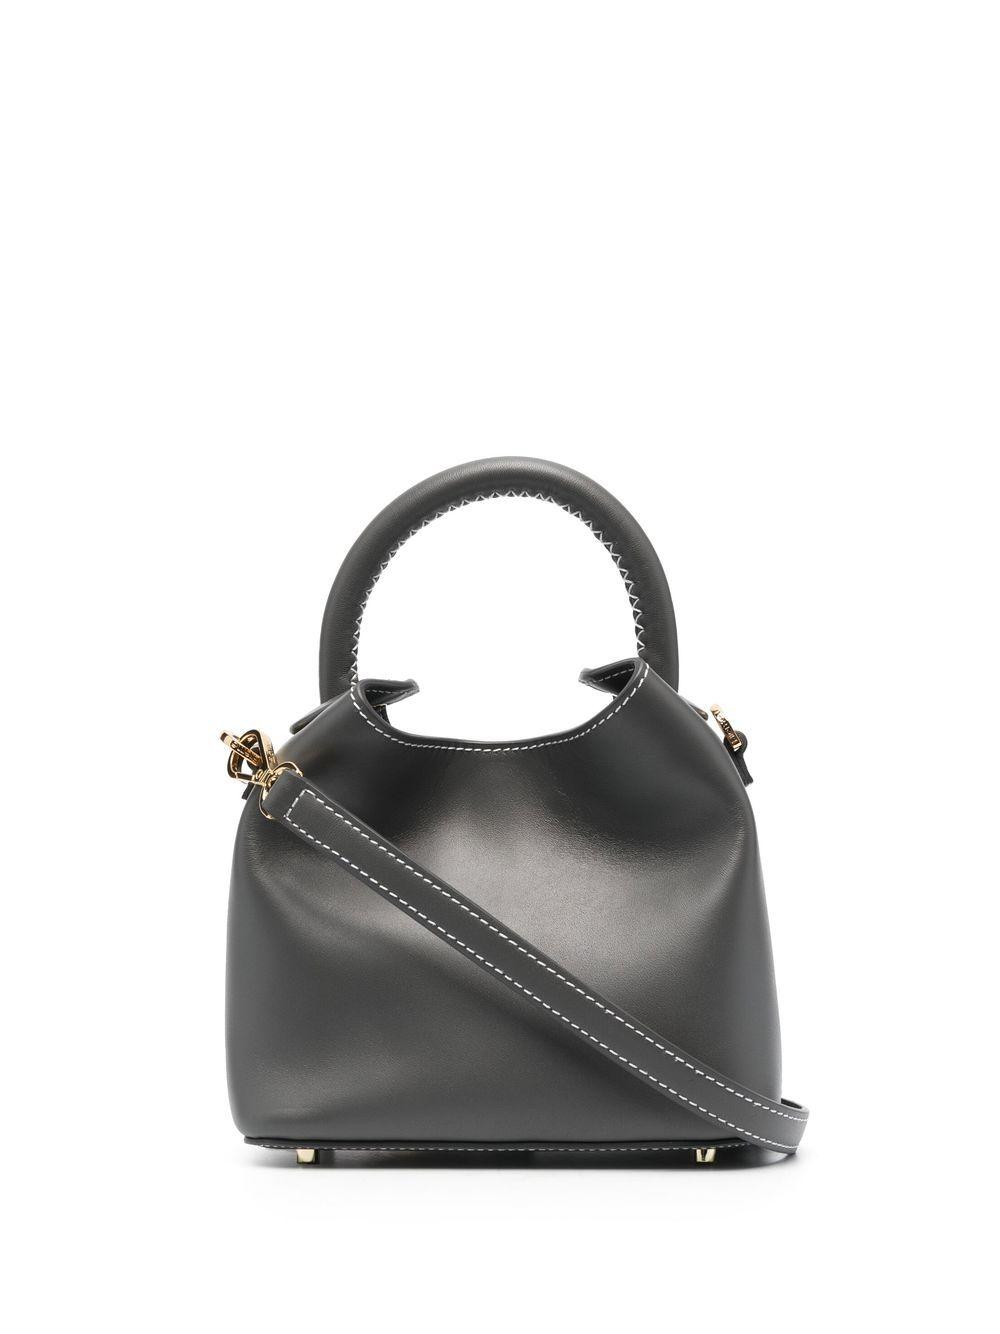 Elleme Dimple Leather Tote Bag in Grey (Gray) | Lyst